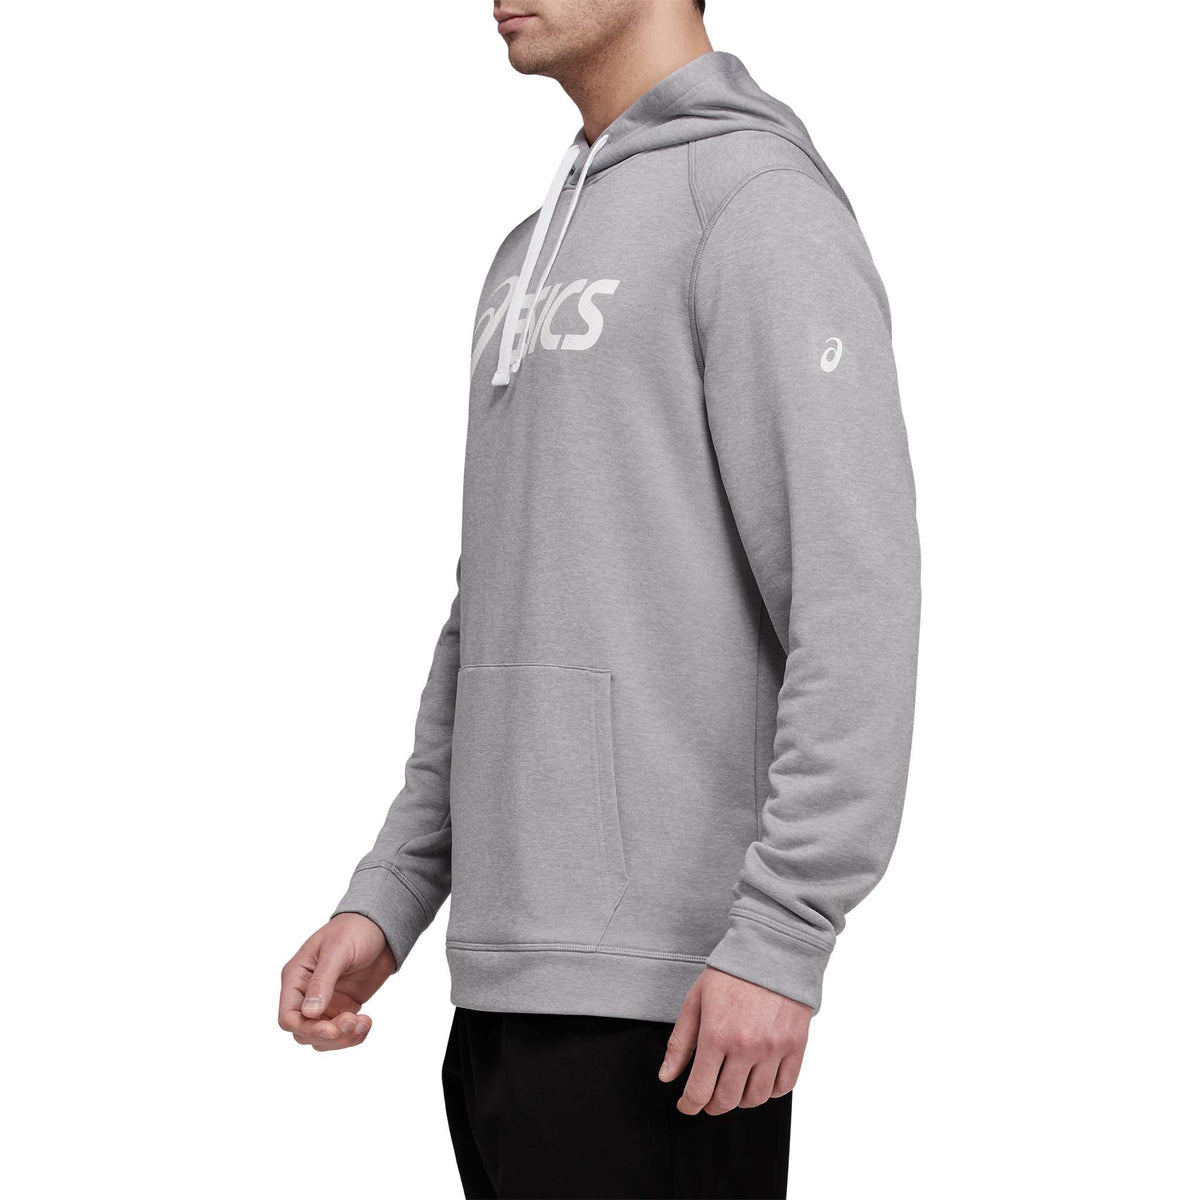 ASICS French Terry Hoodie chandail gris homme lateral